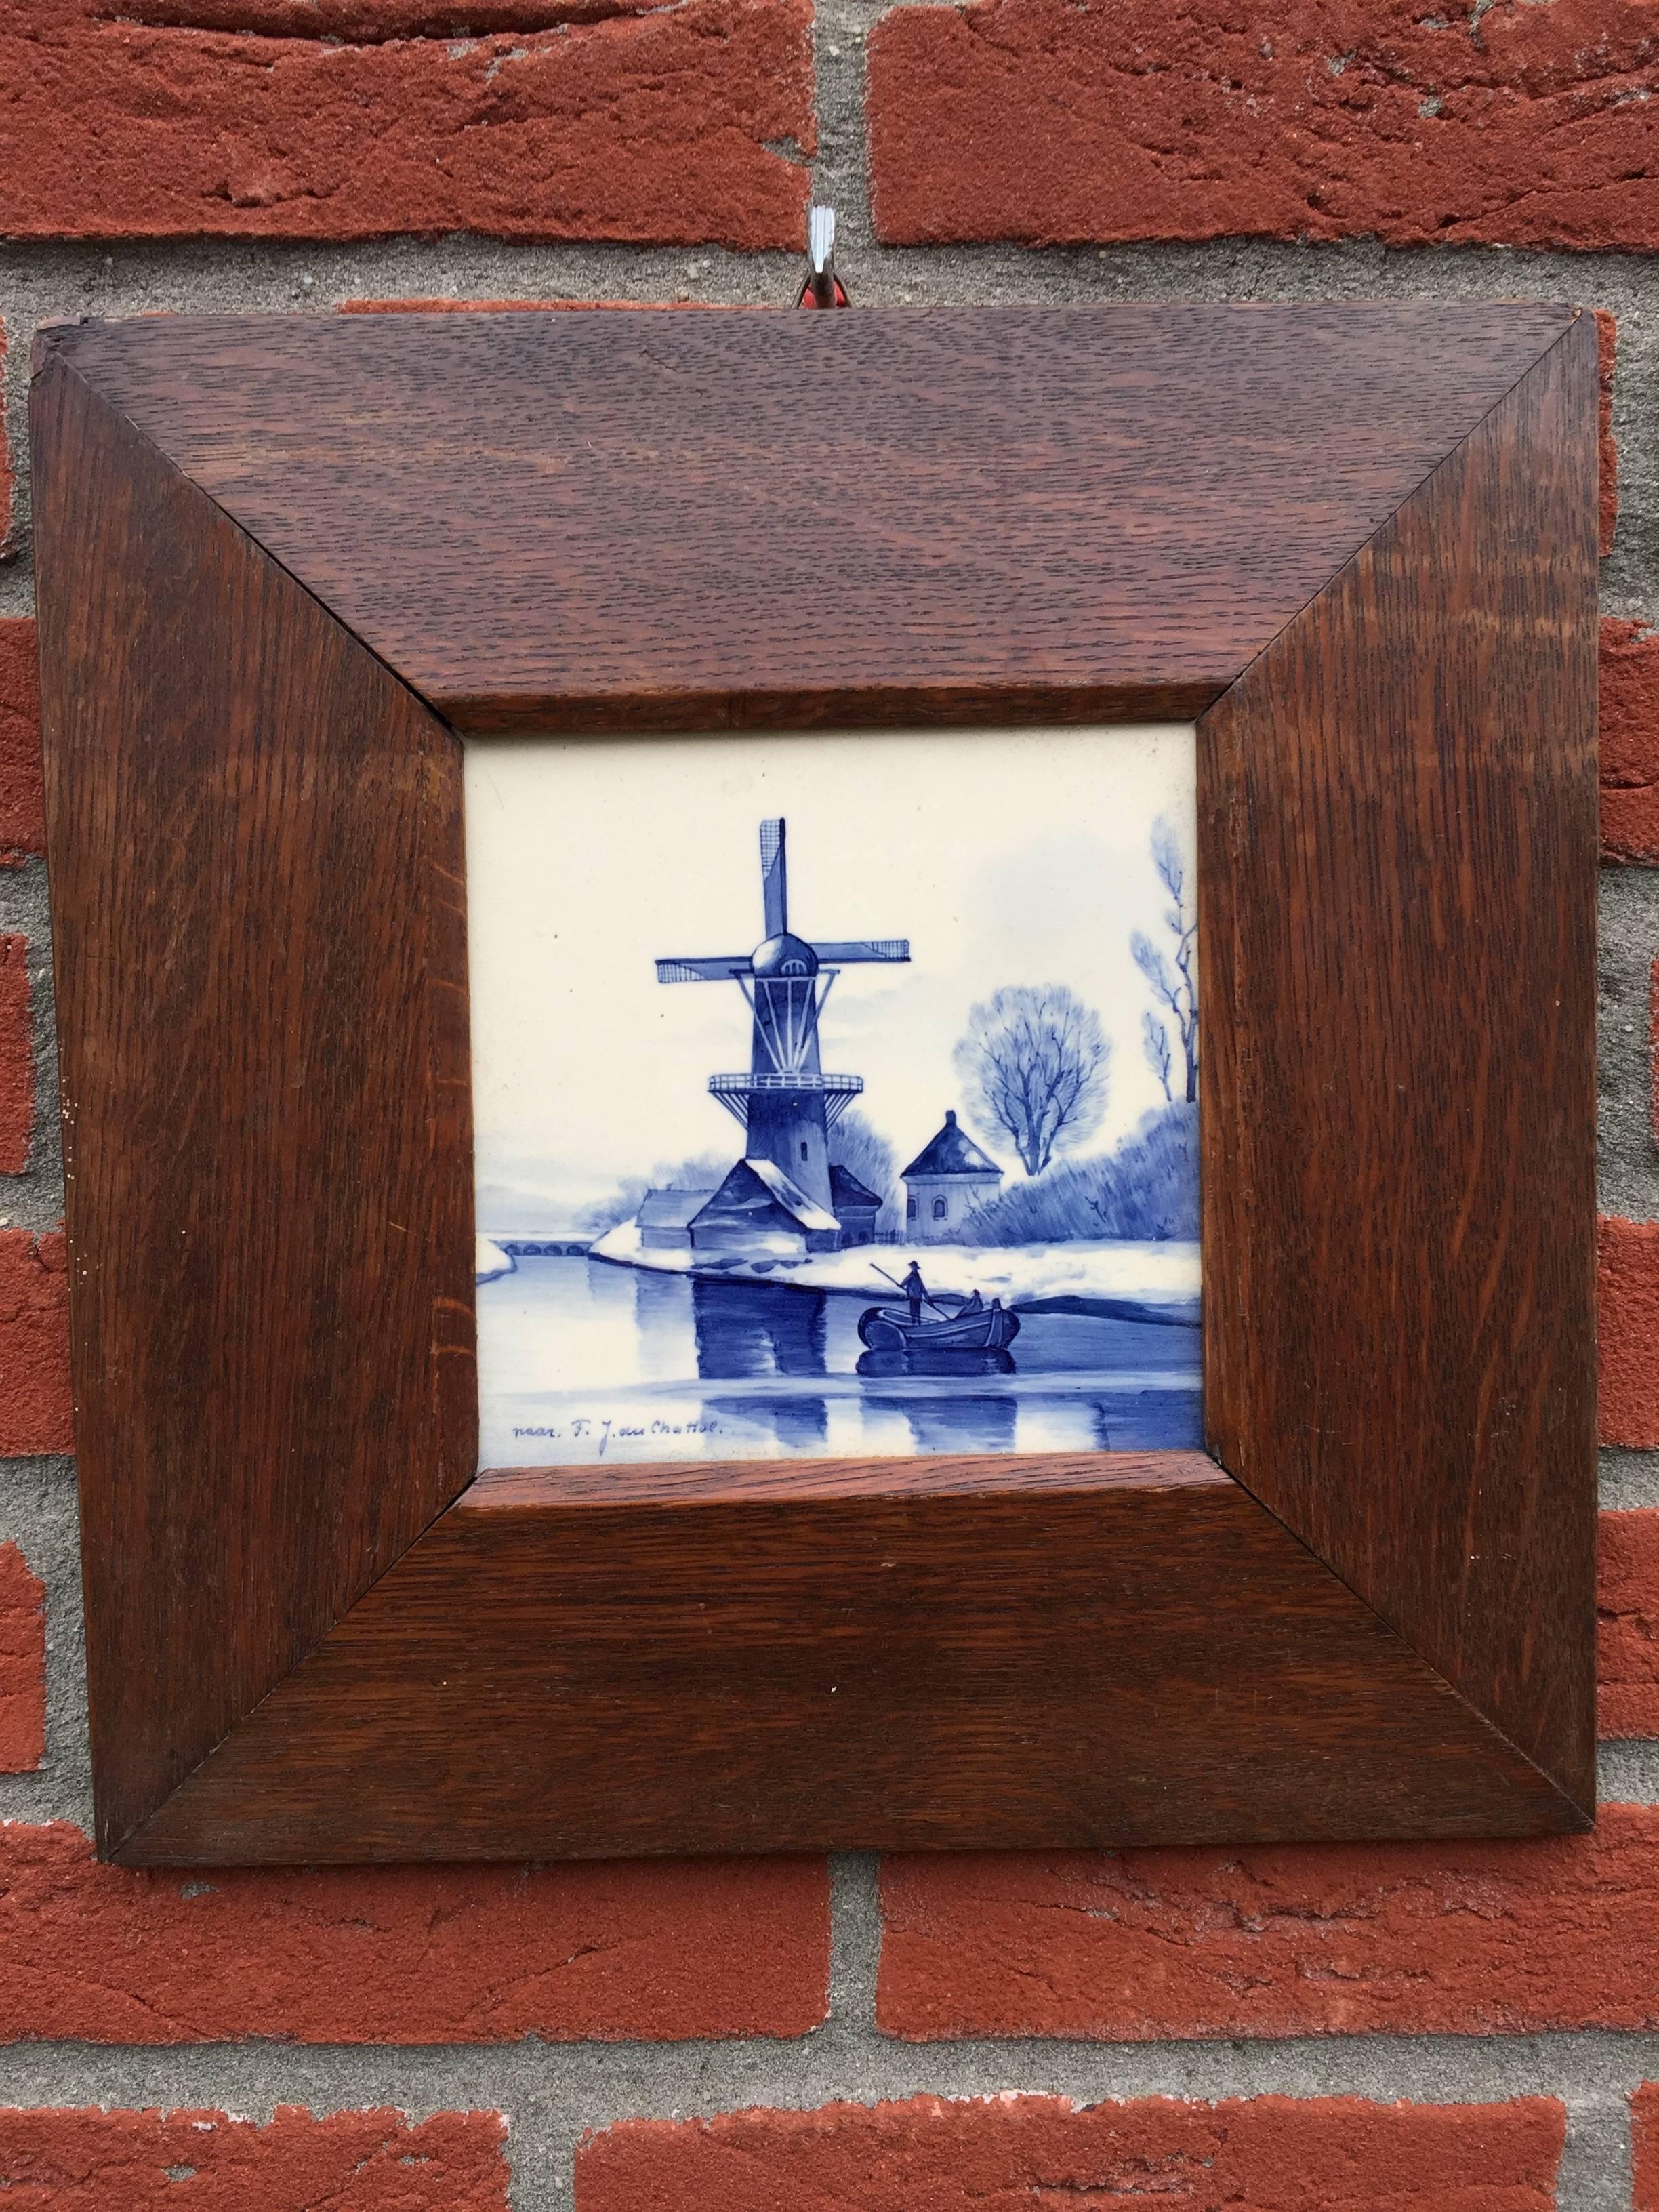 Antique pair of Delft blue tiles mounted in oak picture frames.

These wonderfully hand-painted tiles with beautiful shades of blue are after two famous and early Dutch paintings. The landscape with windmill is painted after F.J. van Rossum du